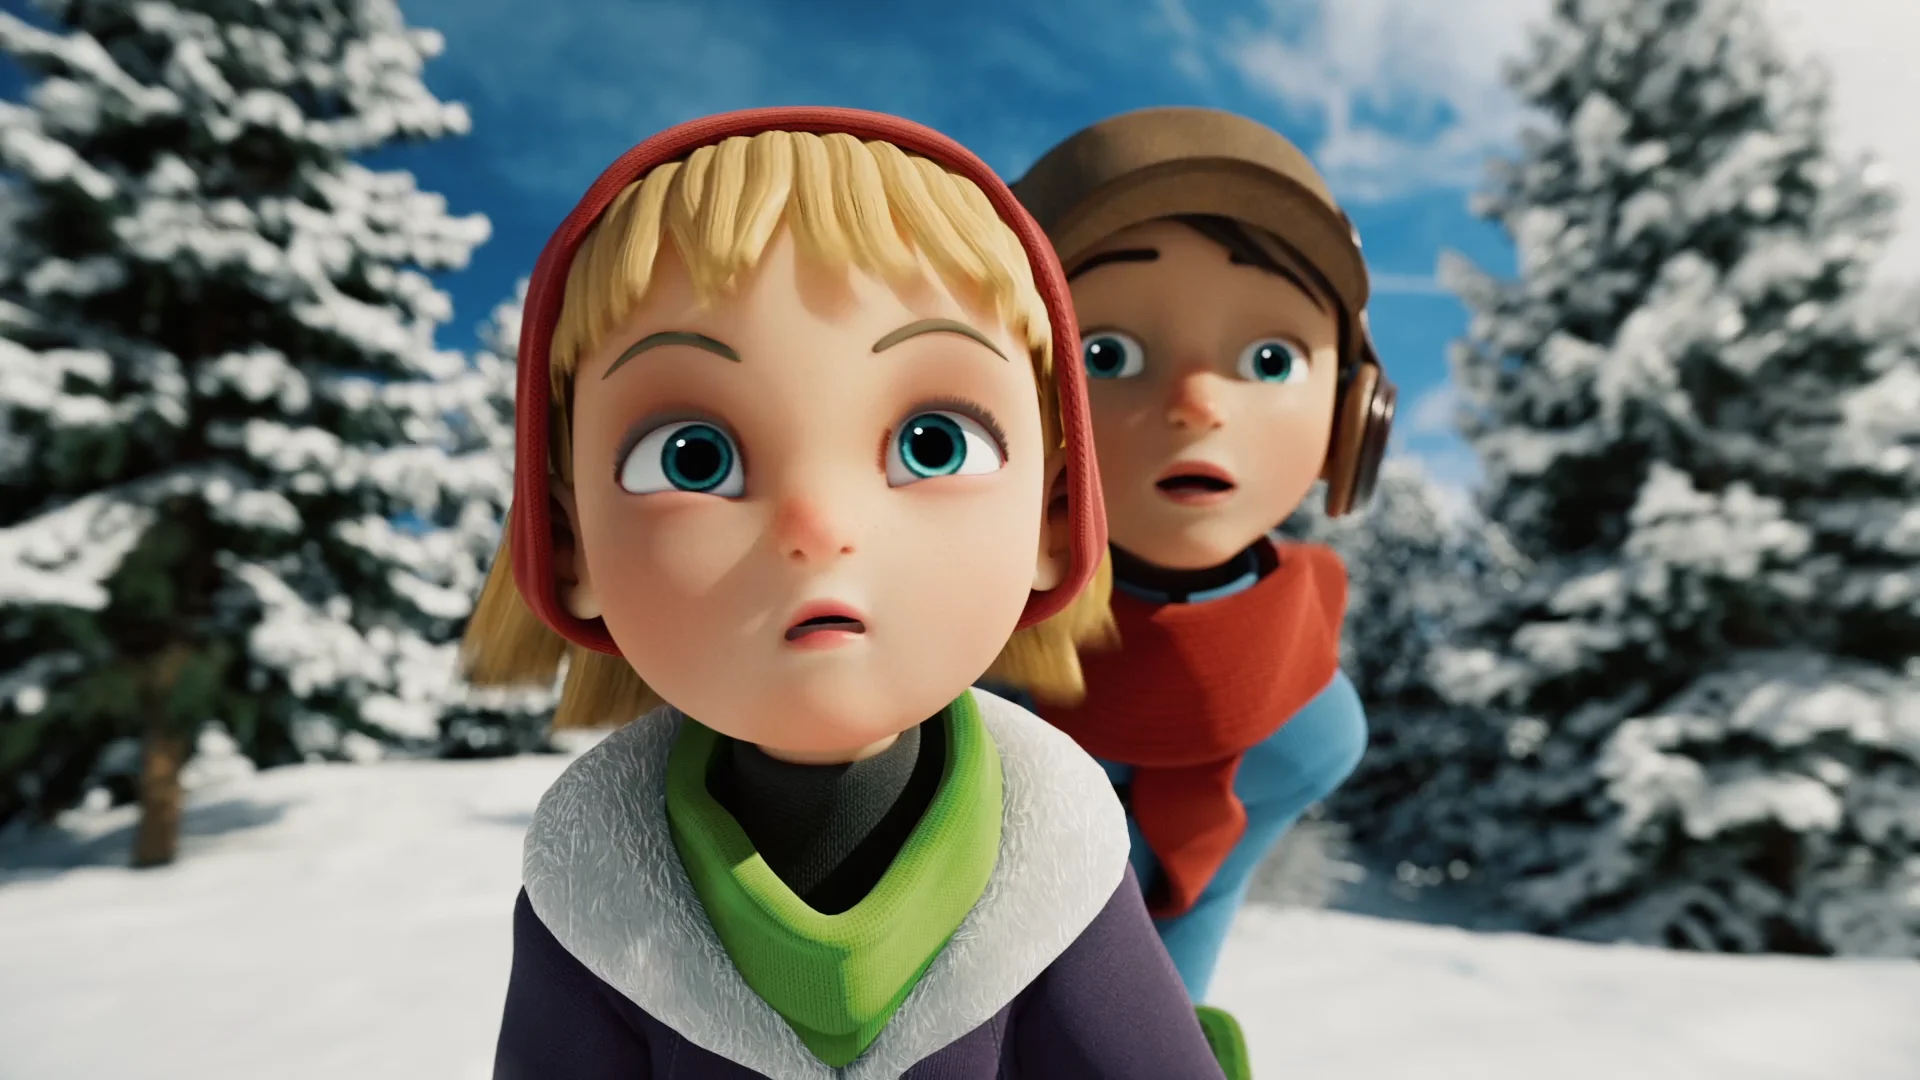 two cartoon characters (a boy and a girl) looking at something behind the camera. scene takes place in a wintery landscape with snow on the ground and on the trees